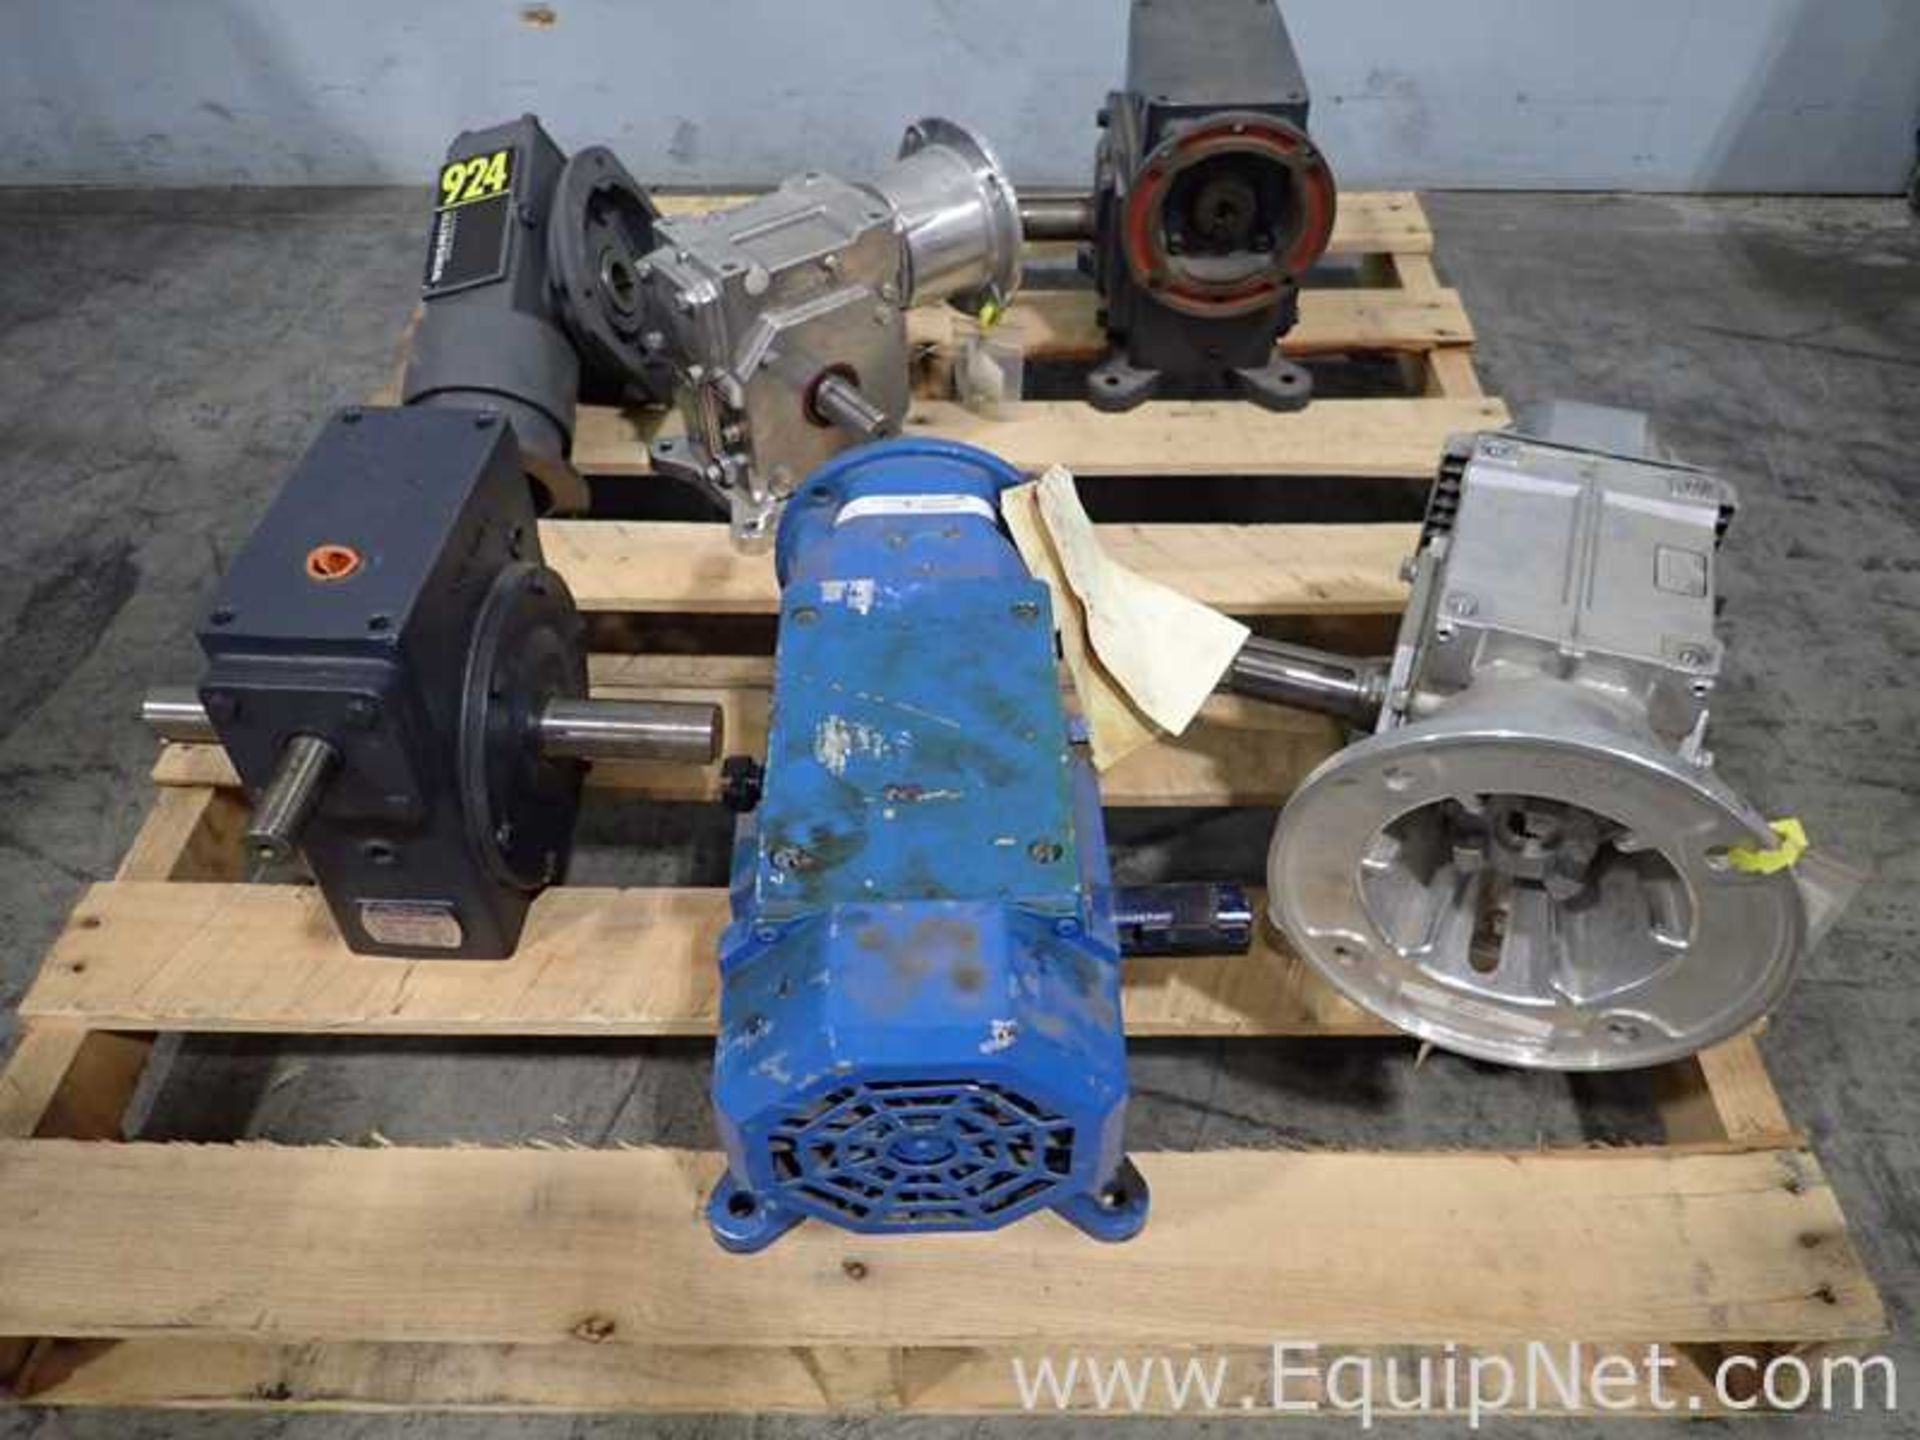 EQUIPNET LISTING #793453; REMOVAL COST: $25; DESCRIPTION: Lot of 6 Various Gear BoxesLot Includes:(